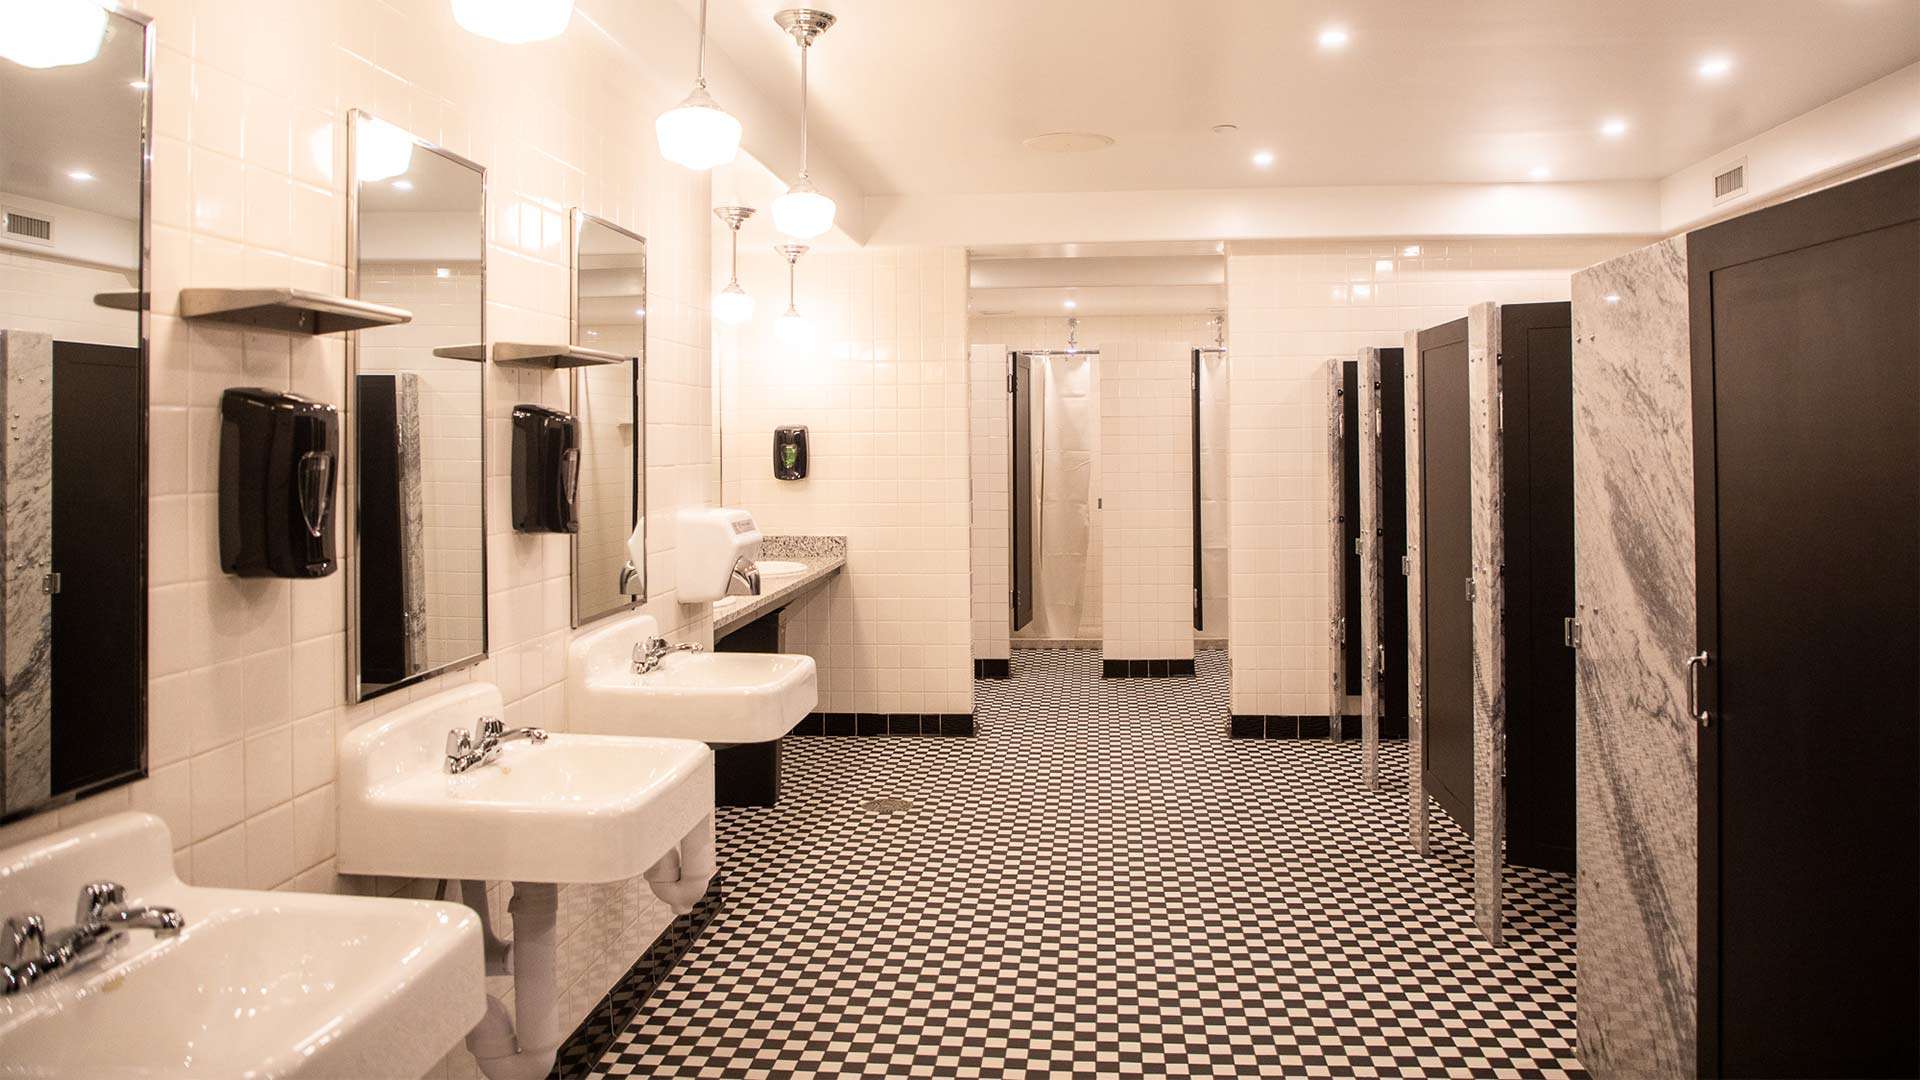 Bathrooms were updated with higher ceilings, durable materials, such as marble, granite and terrazzo, as well as newly designed private bathing and dressing areas.